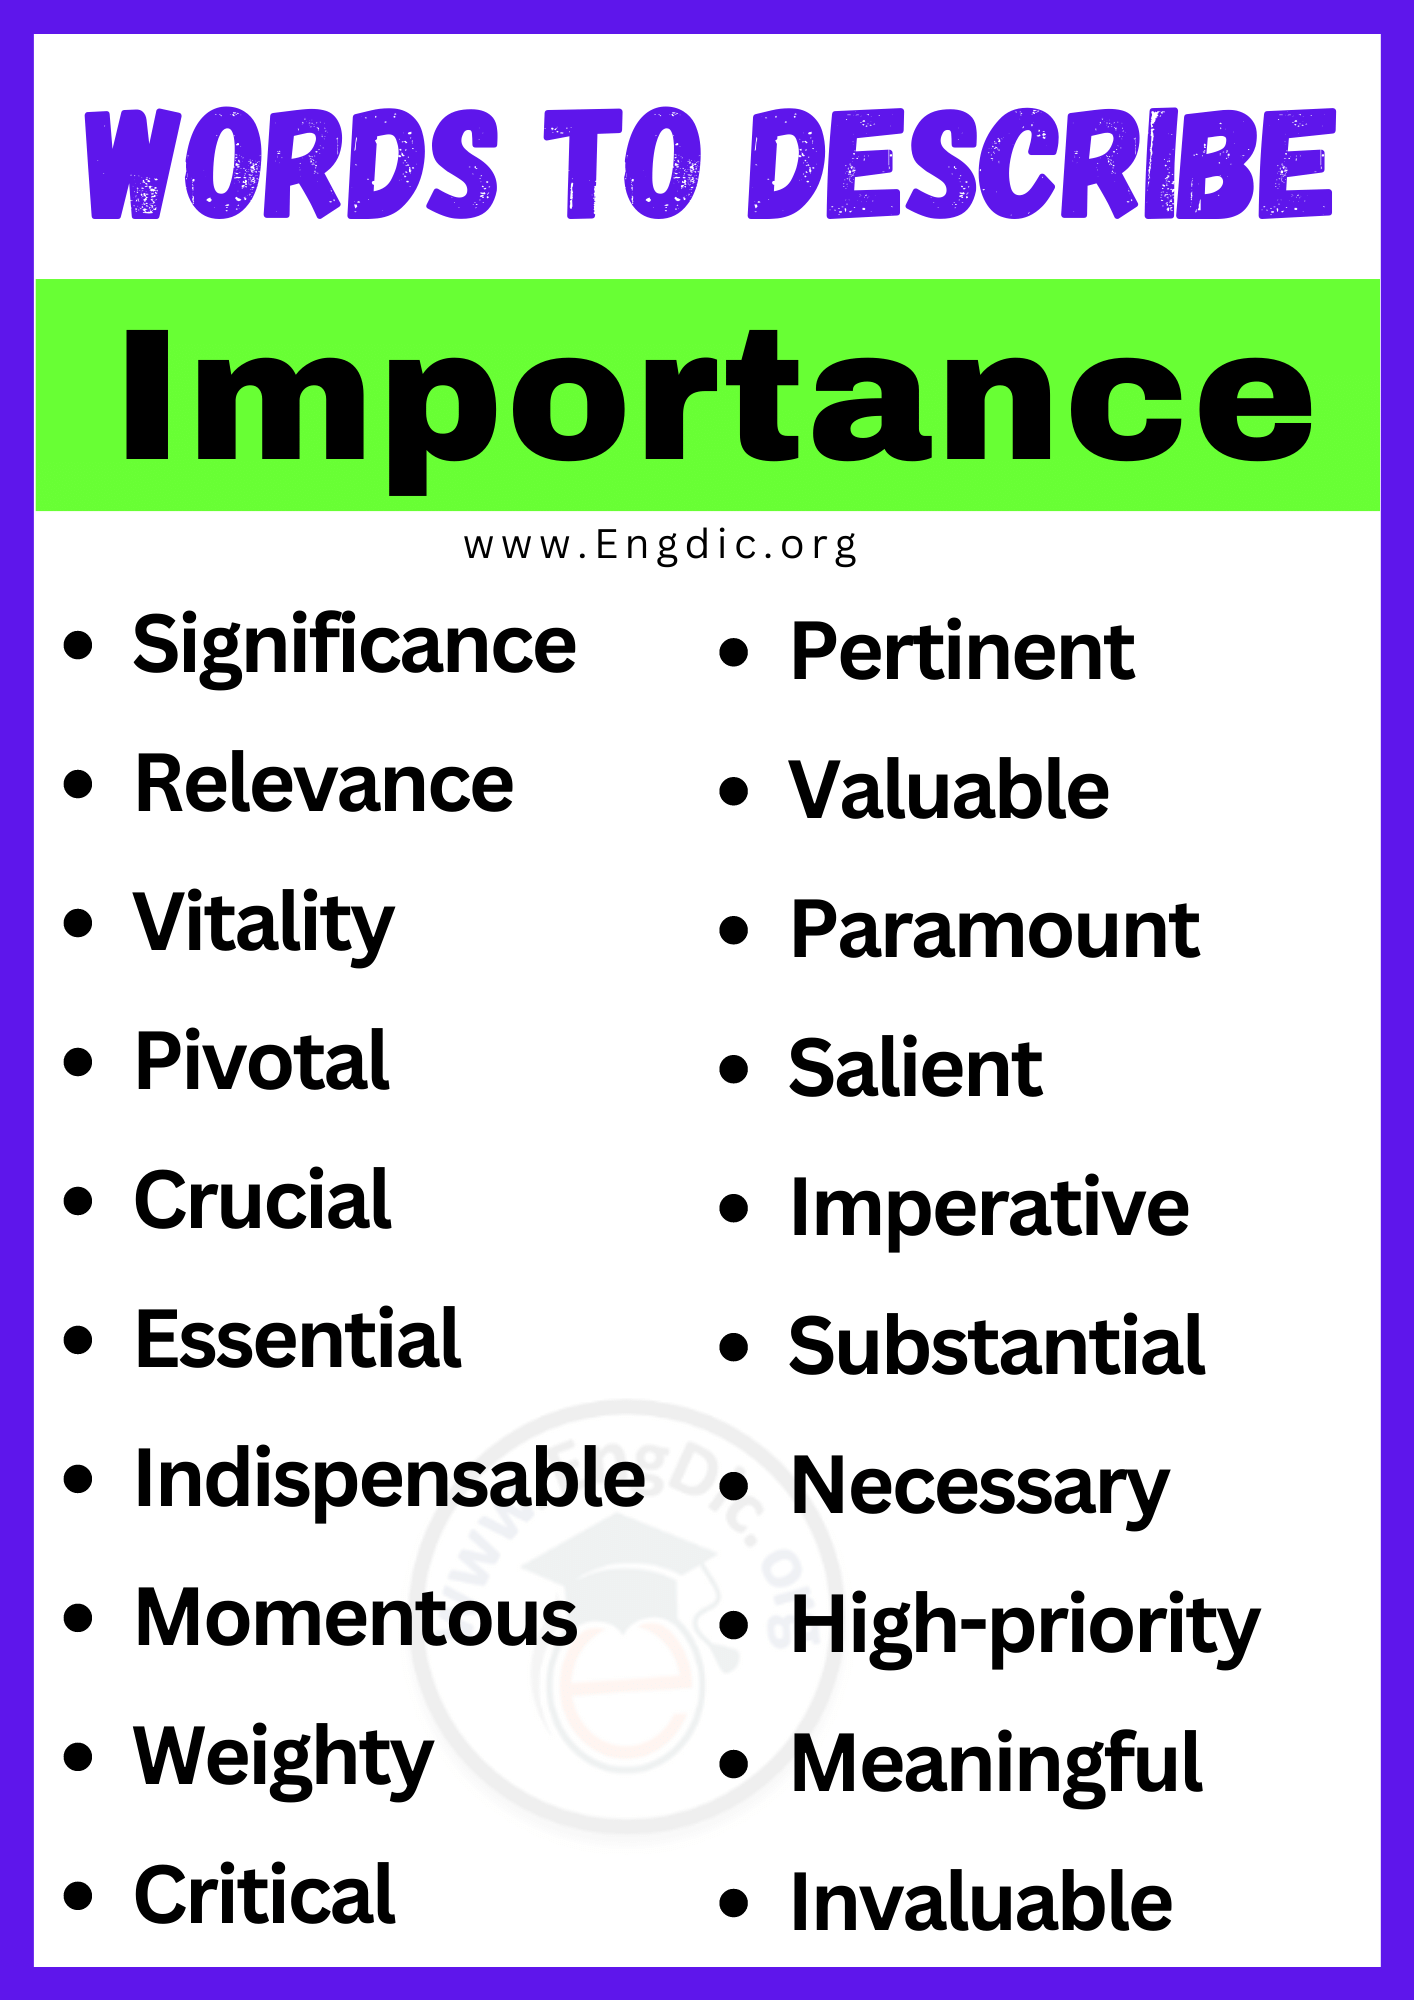 Words to Describe Importance